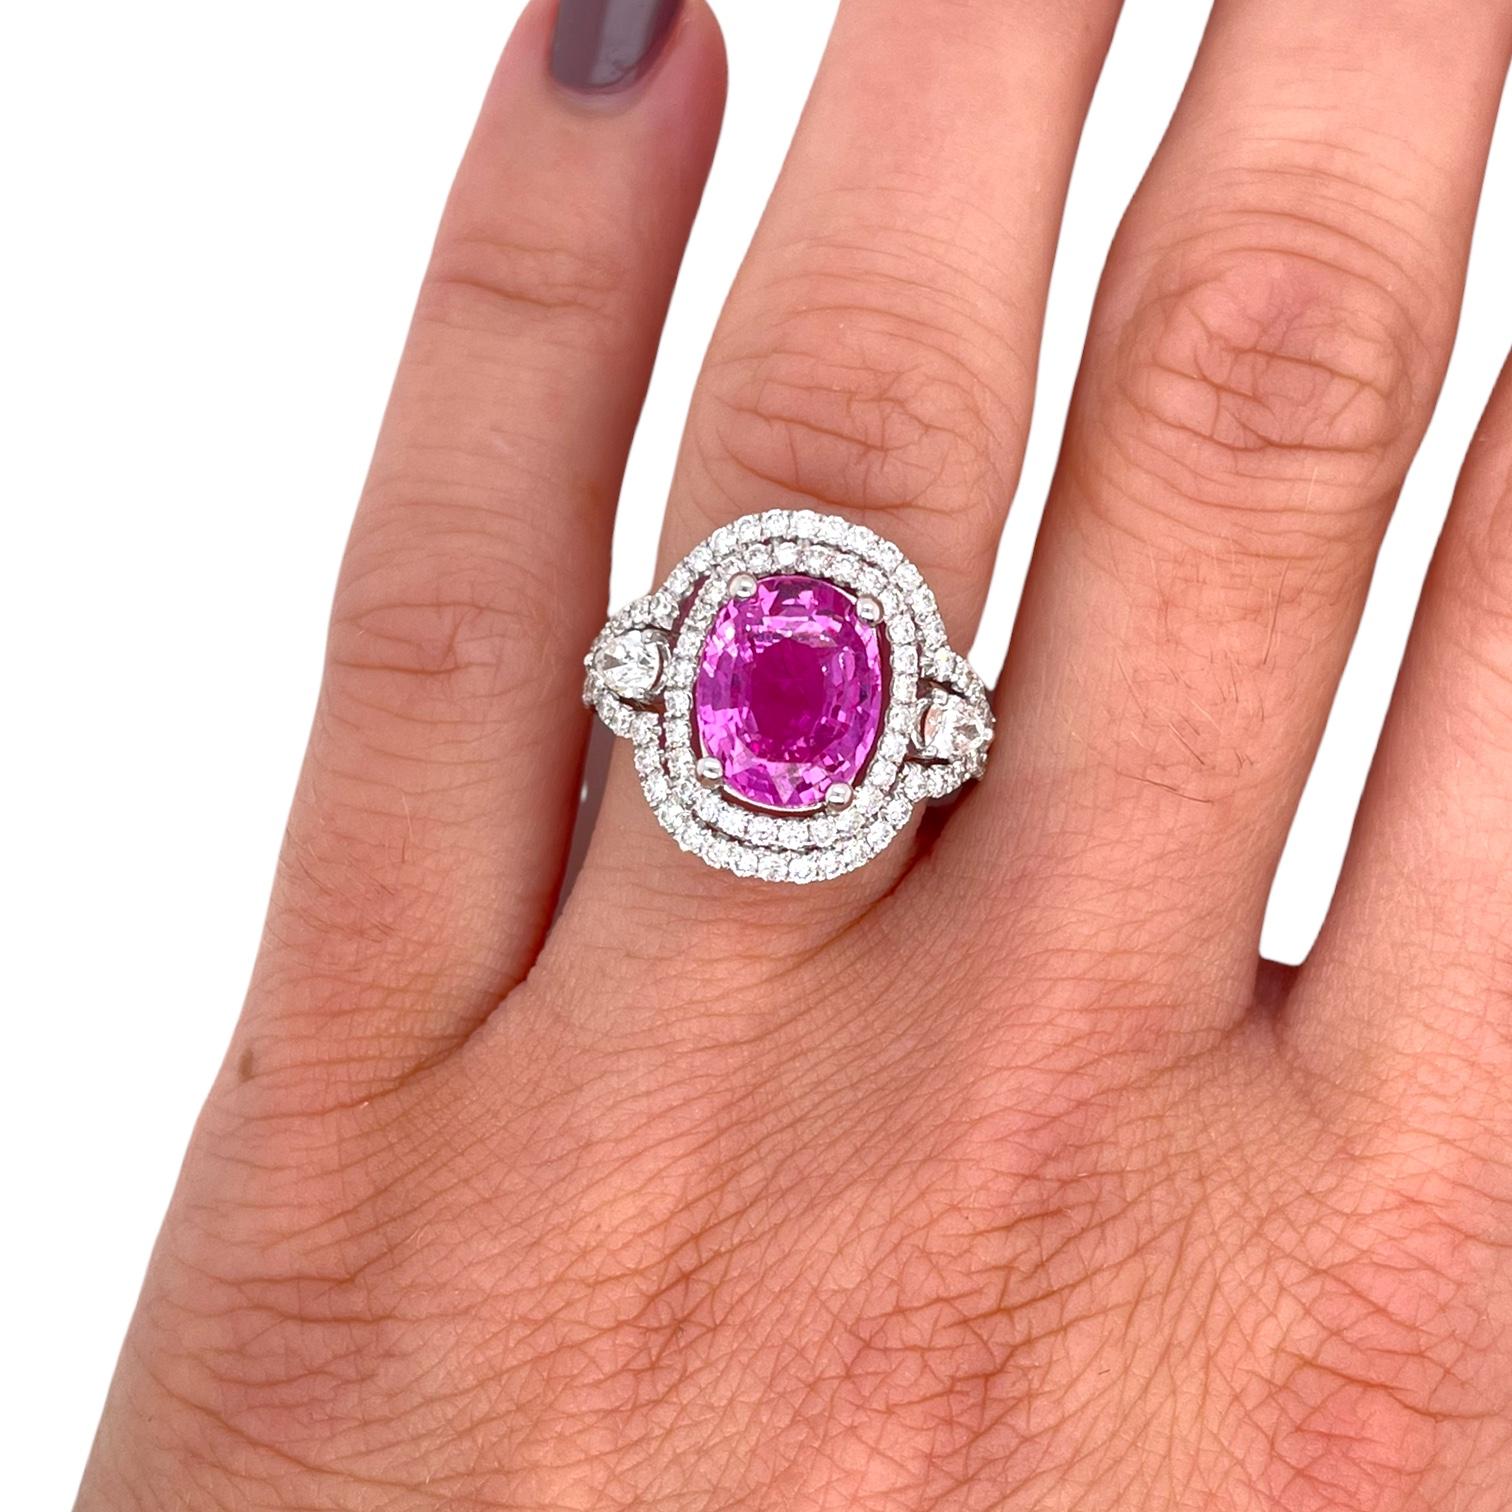 Gorgeous double halo pink sapphire and diamond ring in 18k white gold. Ring is centered around a brilliant oval shape pink sapphire weighing 4.08ct. Center stone is surrounded by a double row of round brilliant diamonds, 0.85tcw and two pear shape